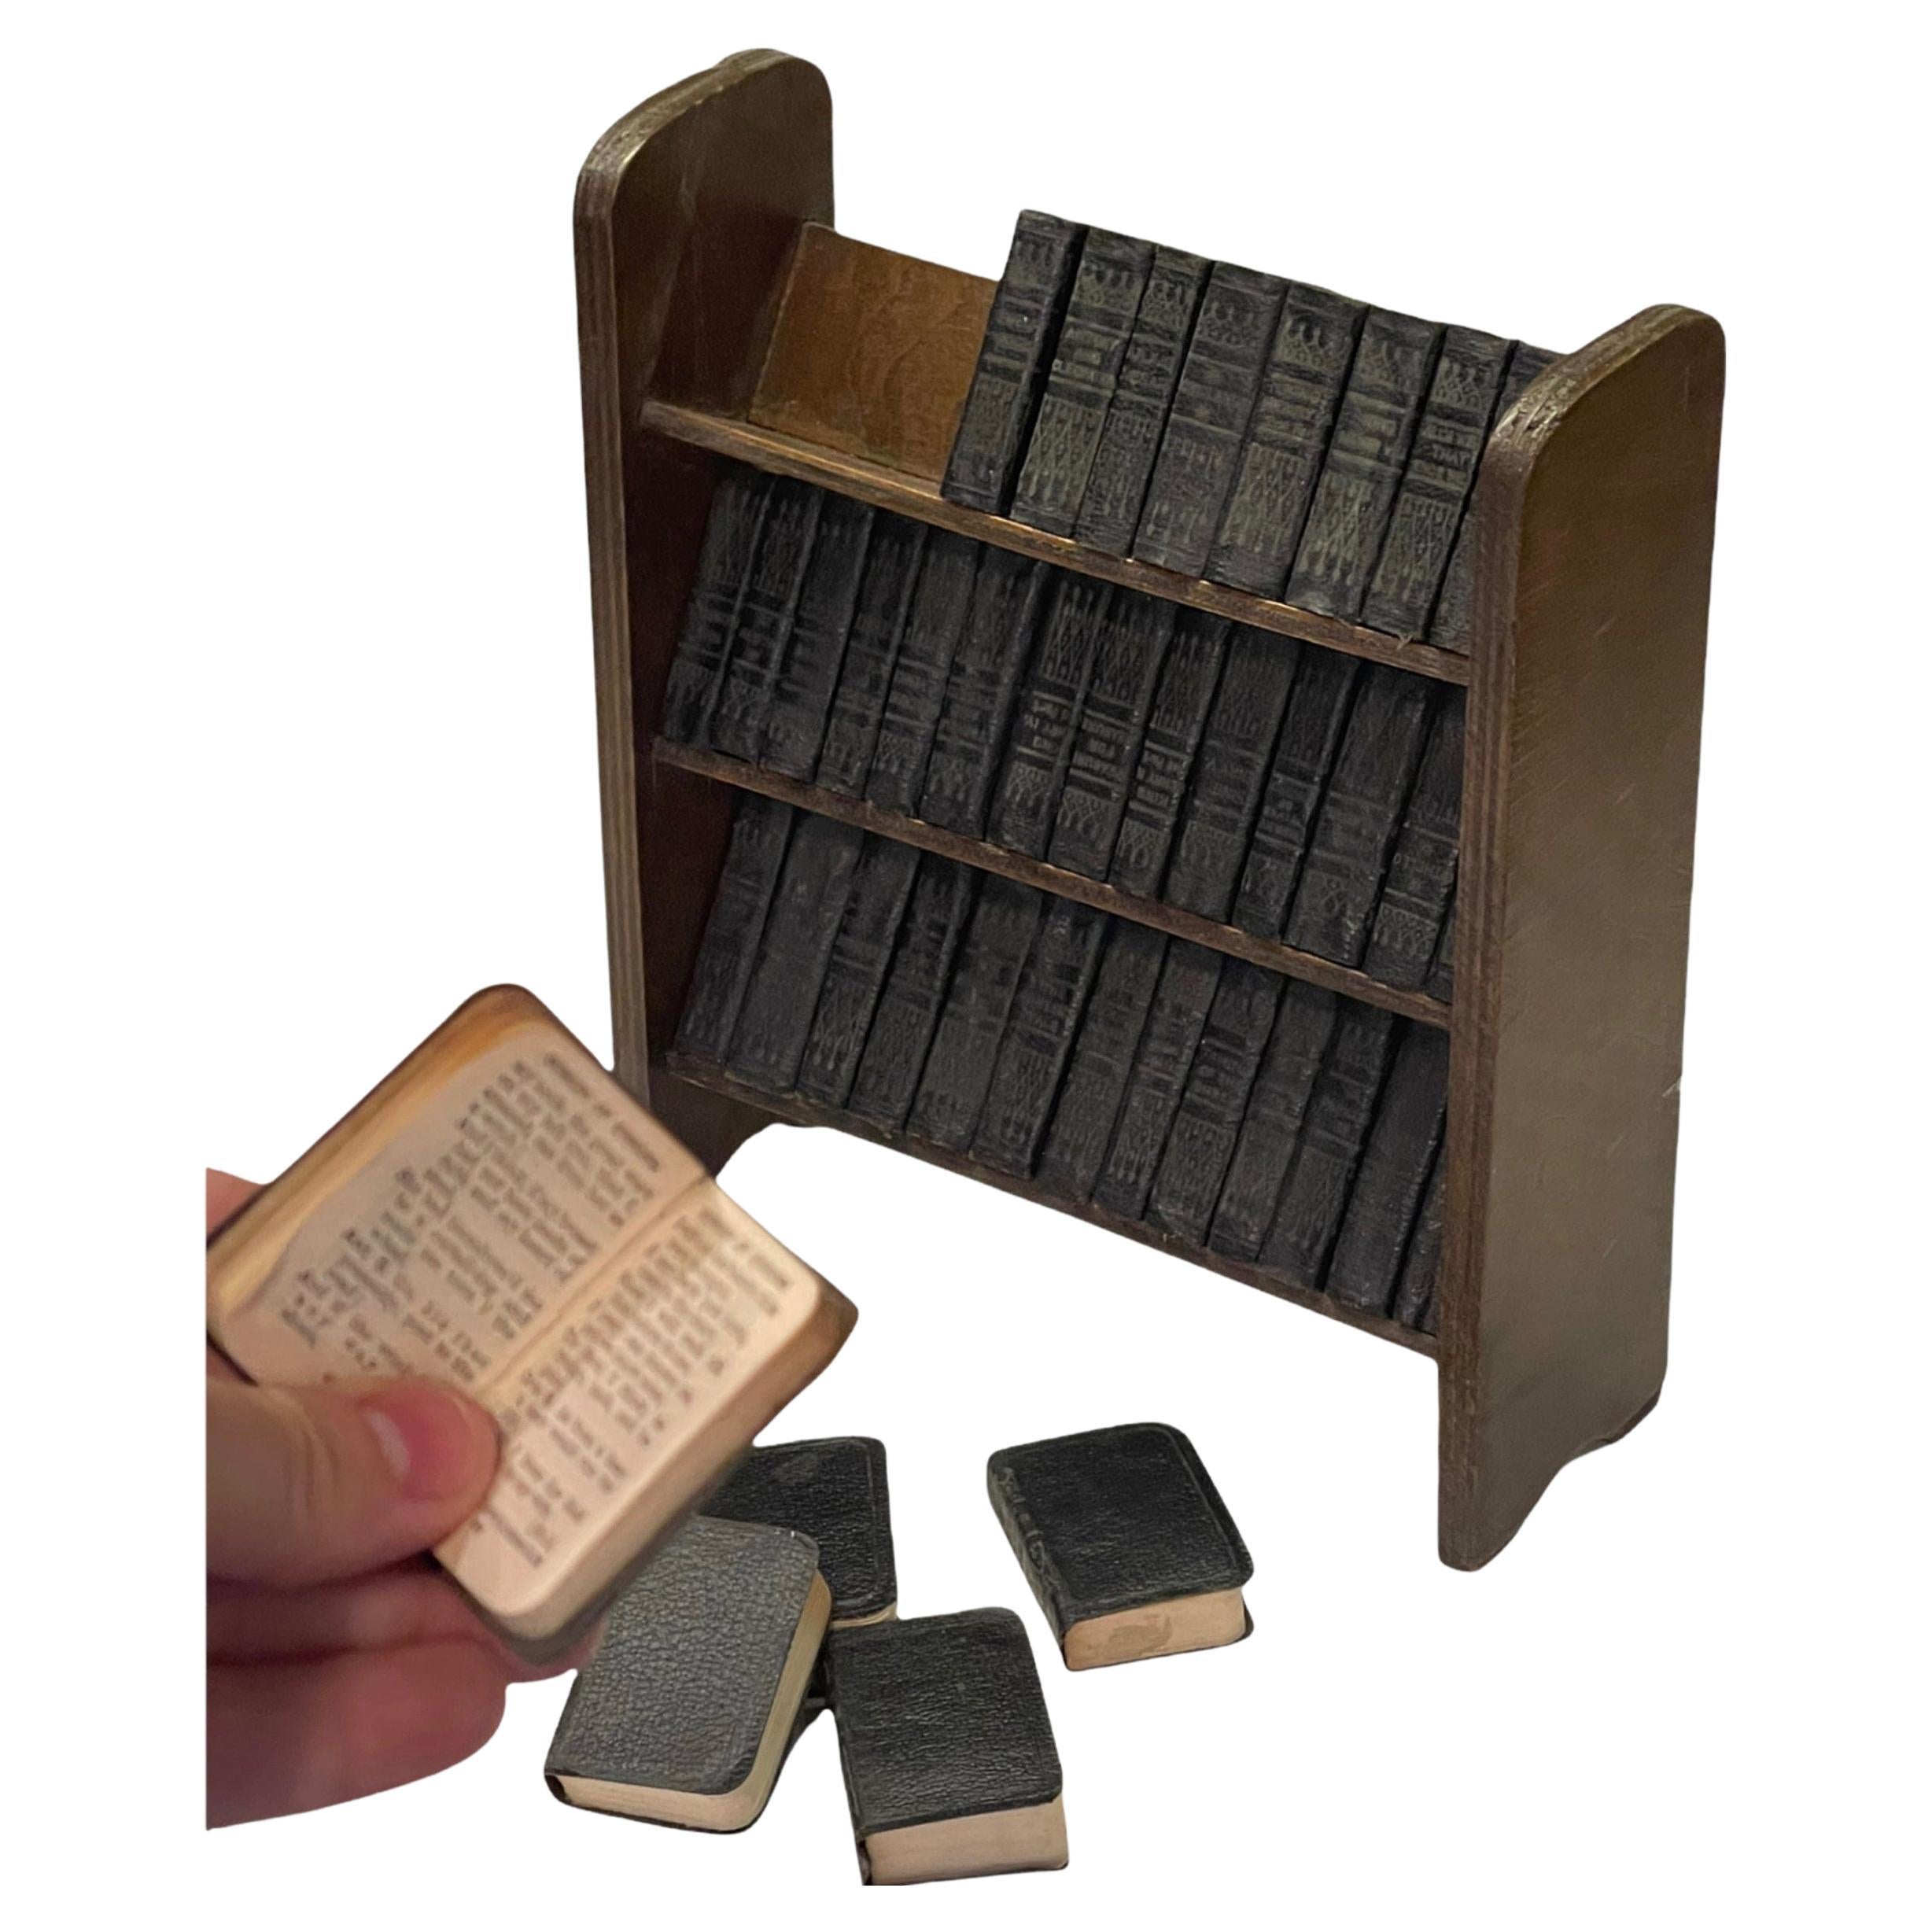 Complete Set of Shakespeare's Works Printed in Miniature Books